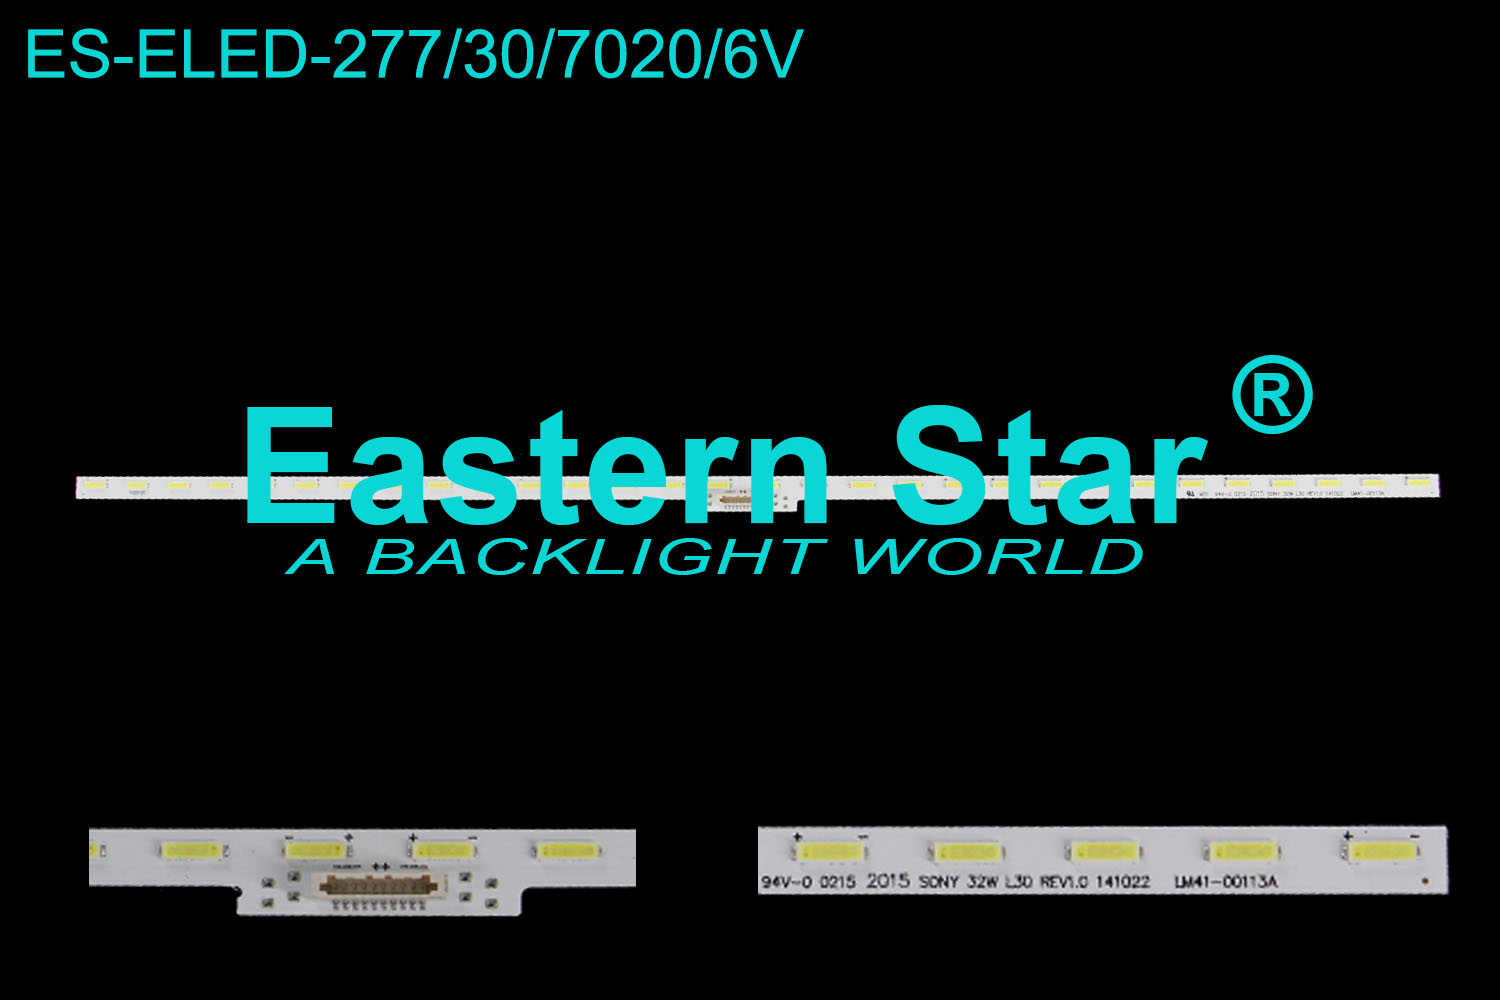 ES-ELED-277 ELED/EDGE TV backlight use for Sony 32'' KDL-32R400C 30LEDs 2015 SONY 32W L30 REV1.0 141022 LM41-00113A LED STRIPS(1)